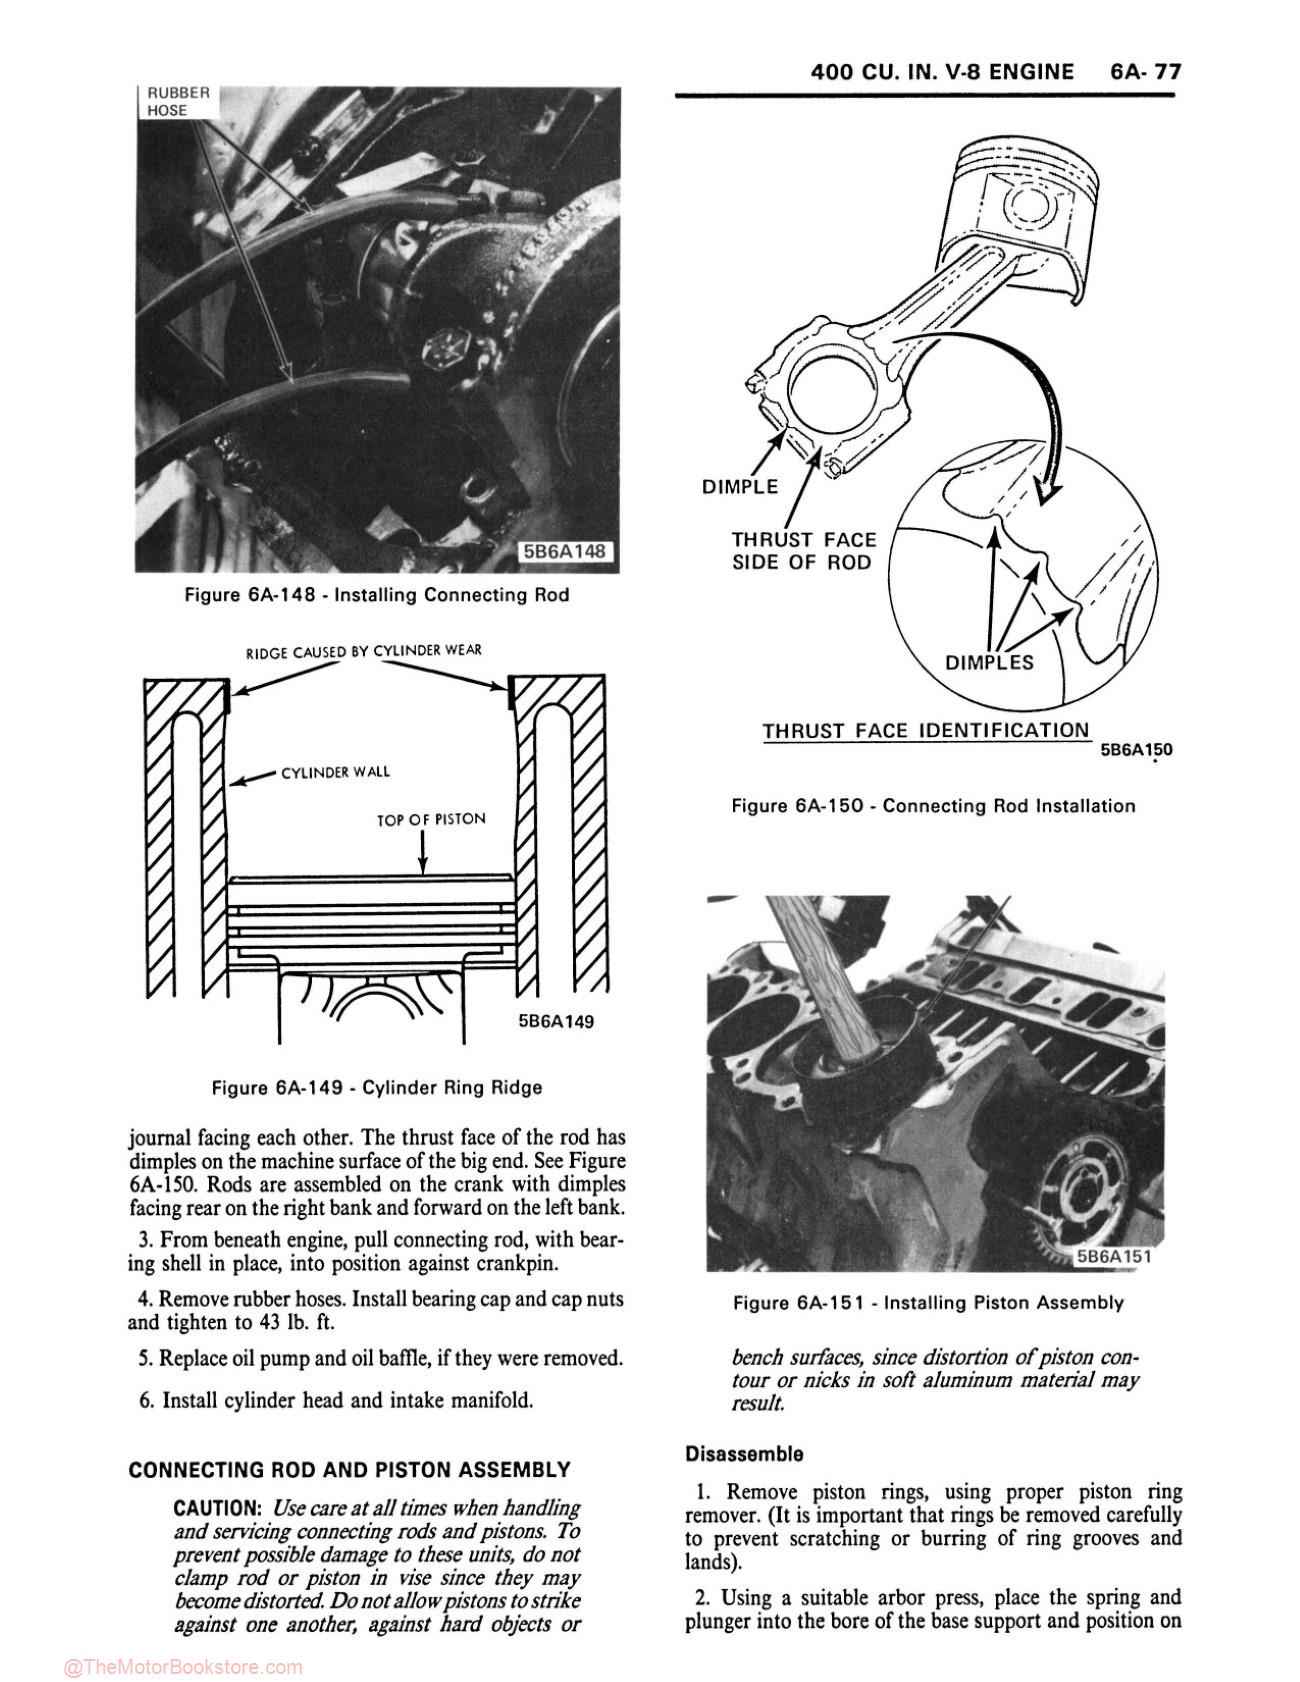 1975 Buick Chassis Service Manual All Series - Sample Page 1